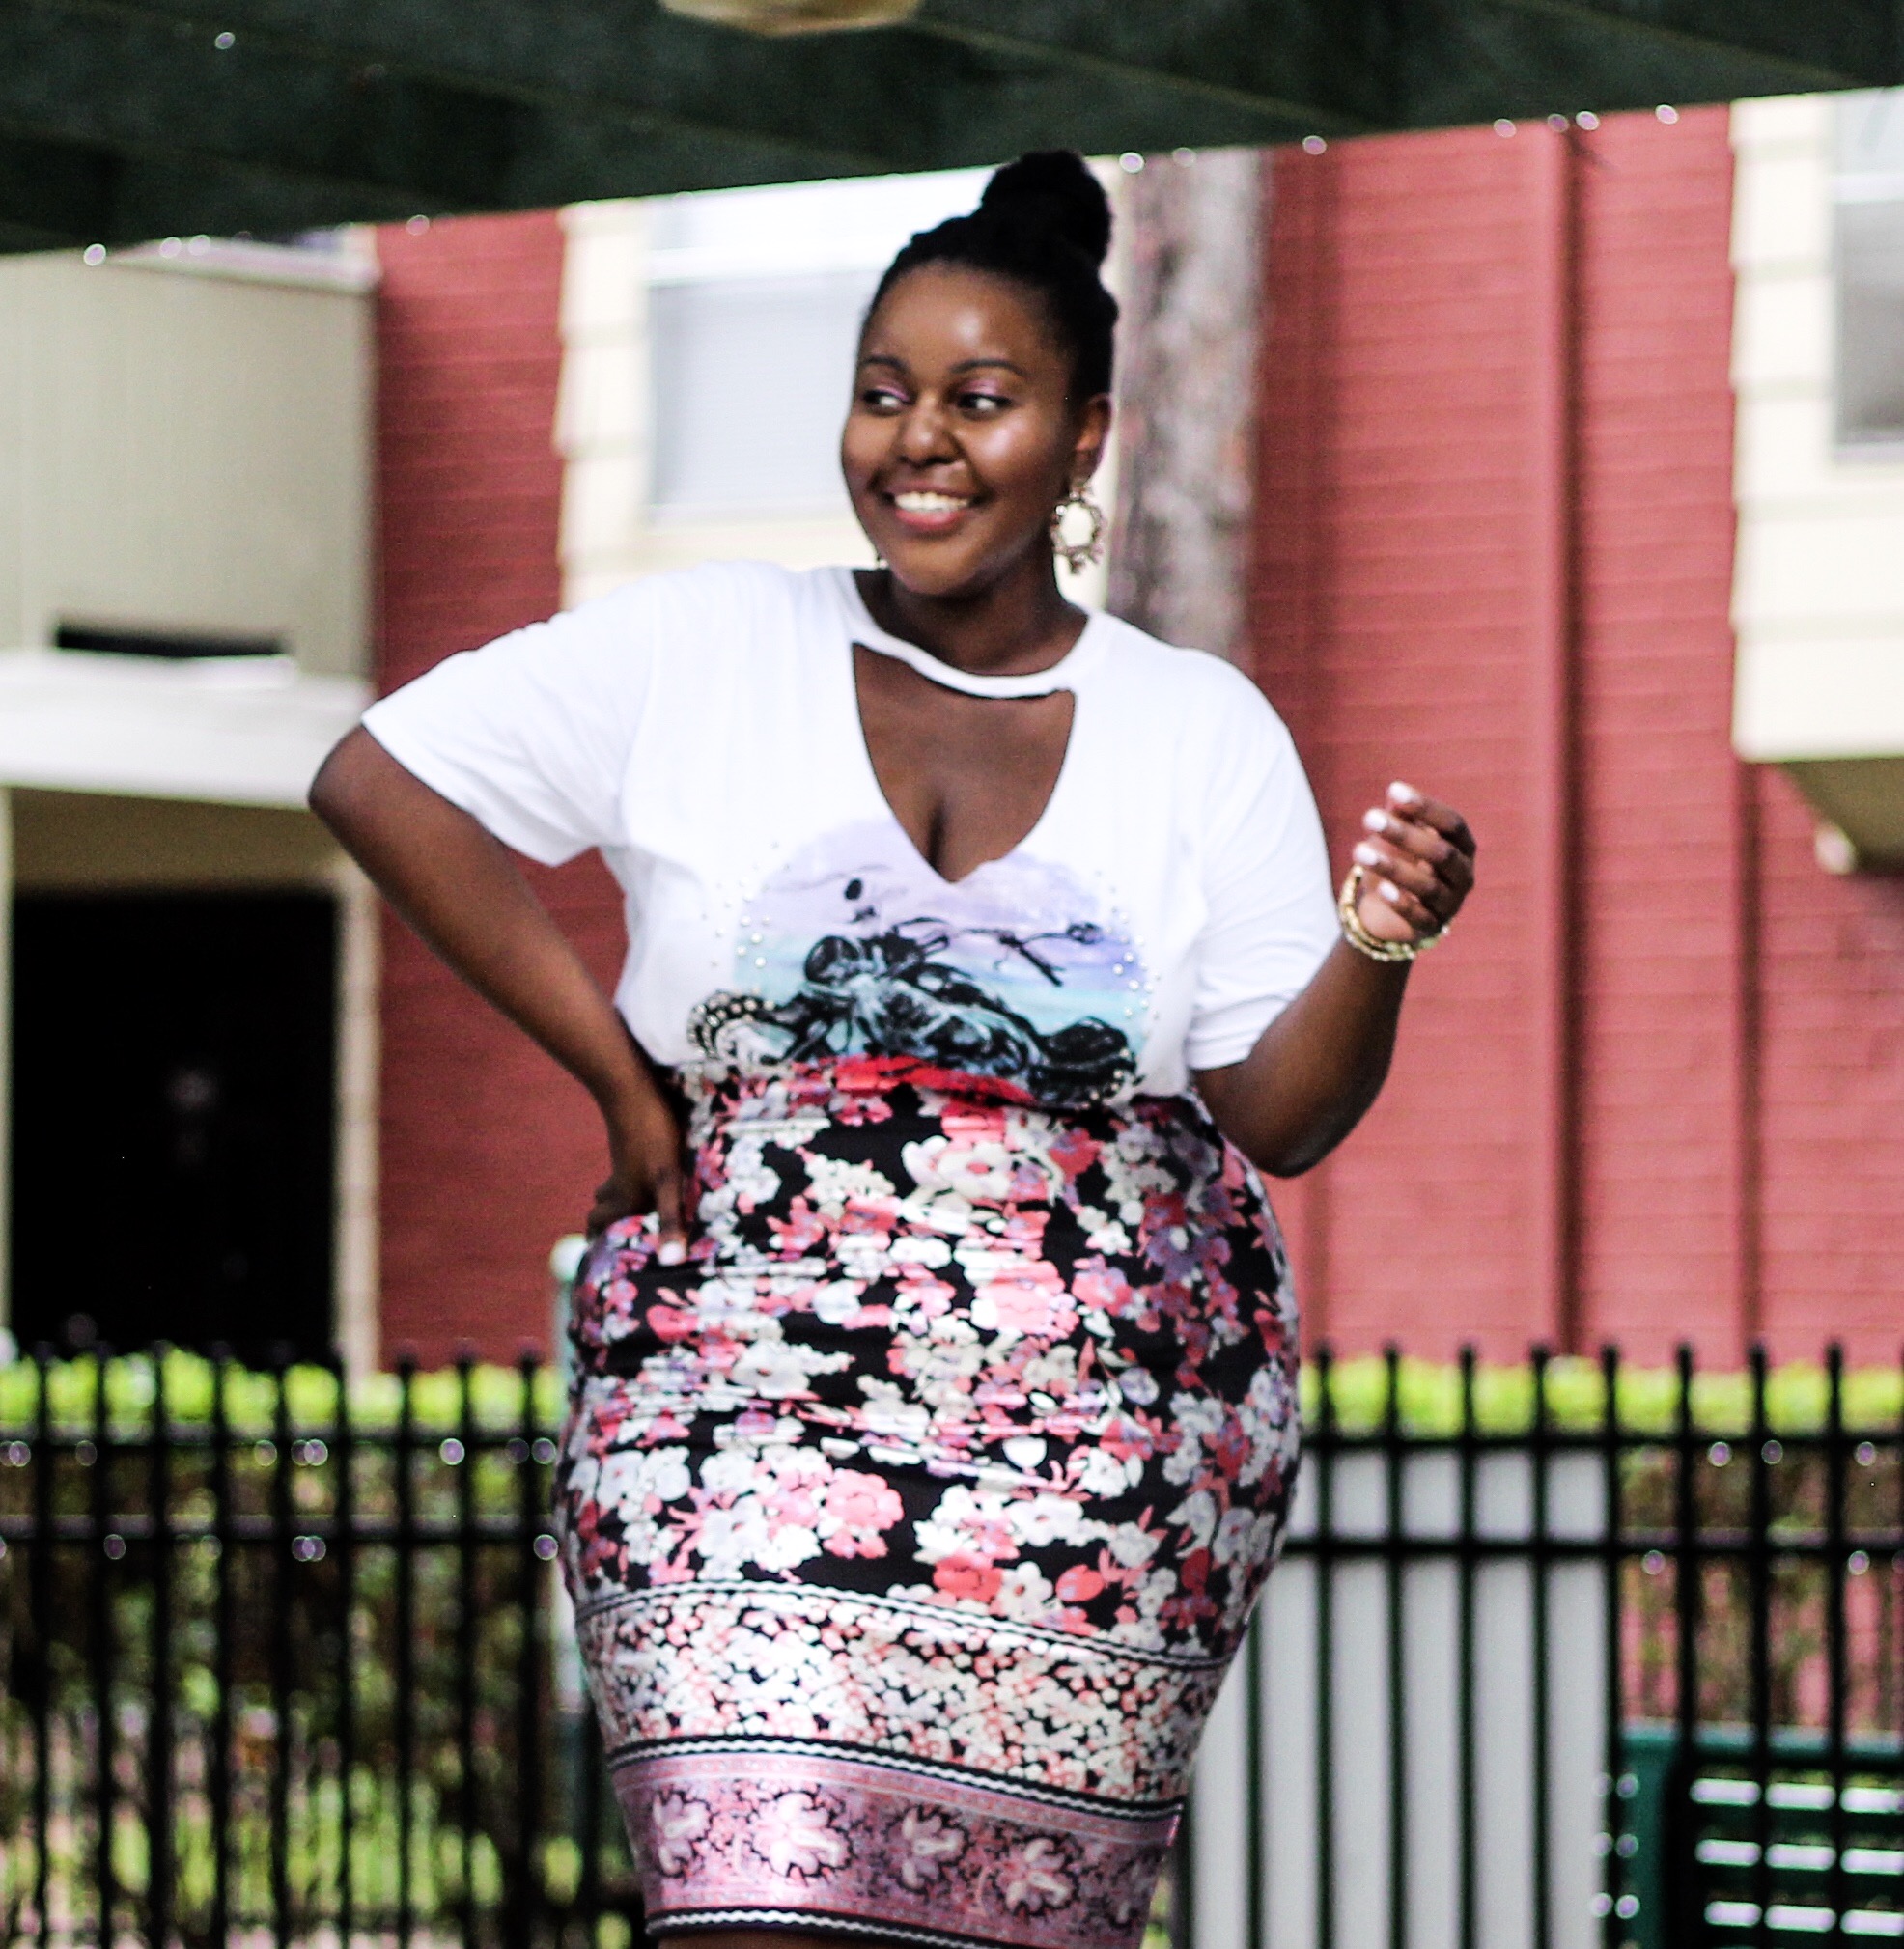 preppy plus size fashion blogs 2017, beautiful curvy girls, how to fill the eye brow of a dark skin, beautiful plus size dark skin girls, plus size black bloggers, clothes for curvy girls, curvy girl fashion clothing, plus blog, plus size fashion tips, plus size women blog, curvy women fashion, plus blog, curvy girl fashion blog, style plus curves, plus size fashion instagram, curvy girl blog, bbw blog, plus size street fashion, plus size beauty blog, plus size fashion ideas, curvy girl summer outfits, plus size fashion magazine, plus fashion bloggers, zara, Rosie the riveter shirt; Emilia embroidered beaded clutch; Vince Camuto heels; Lula shell drop earrings; Aldo Galigossi sunnies